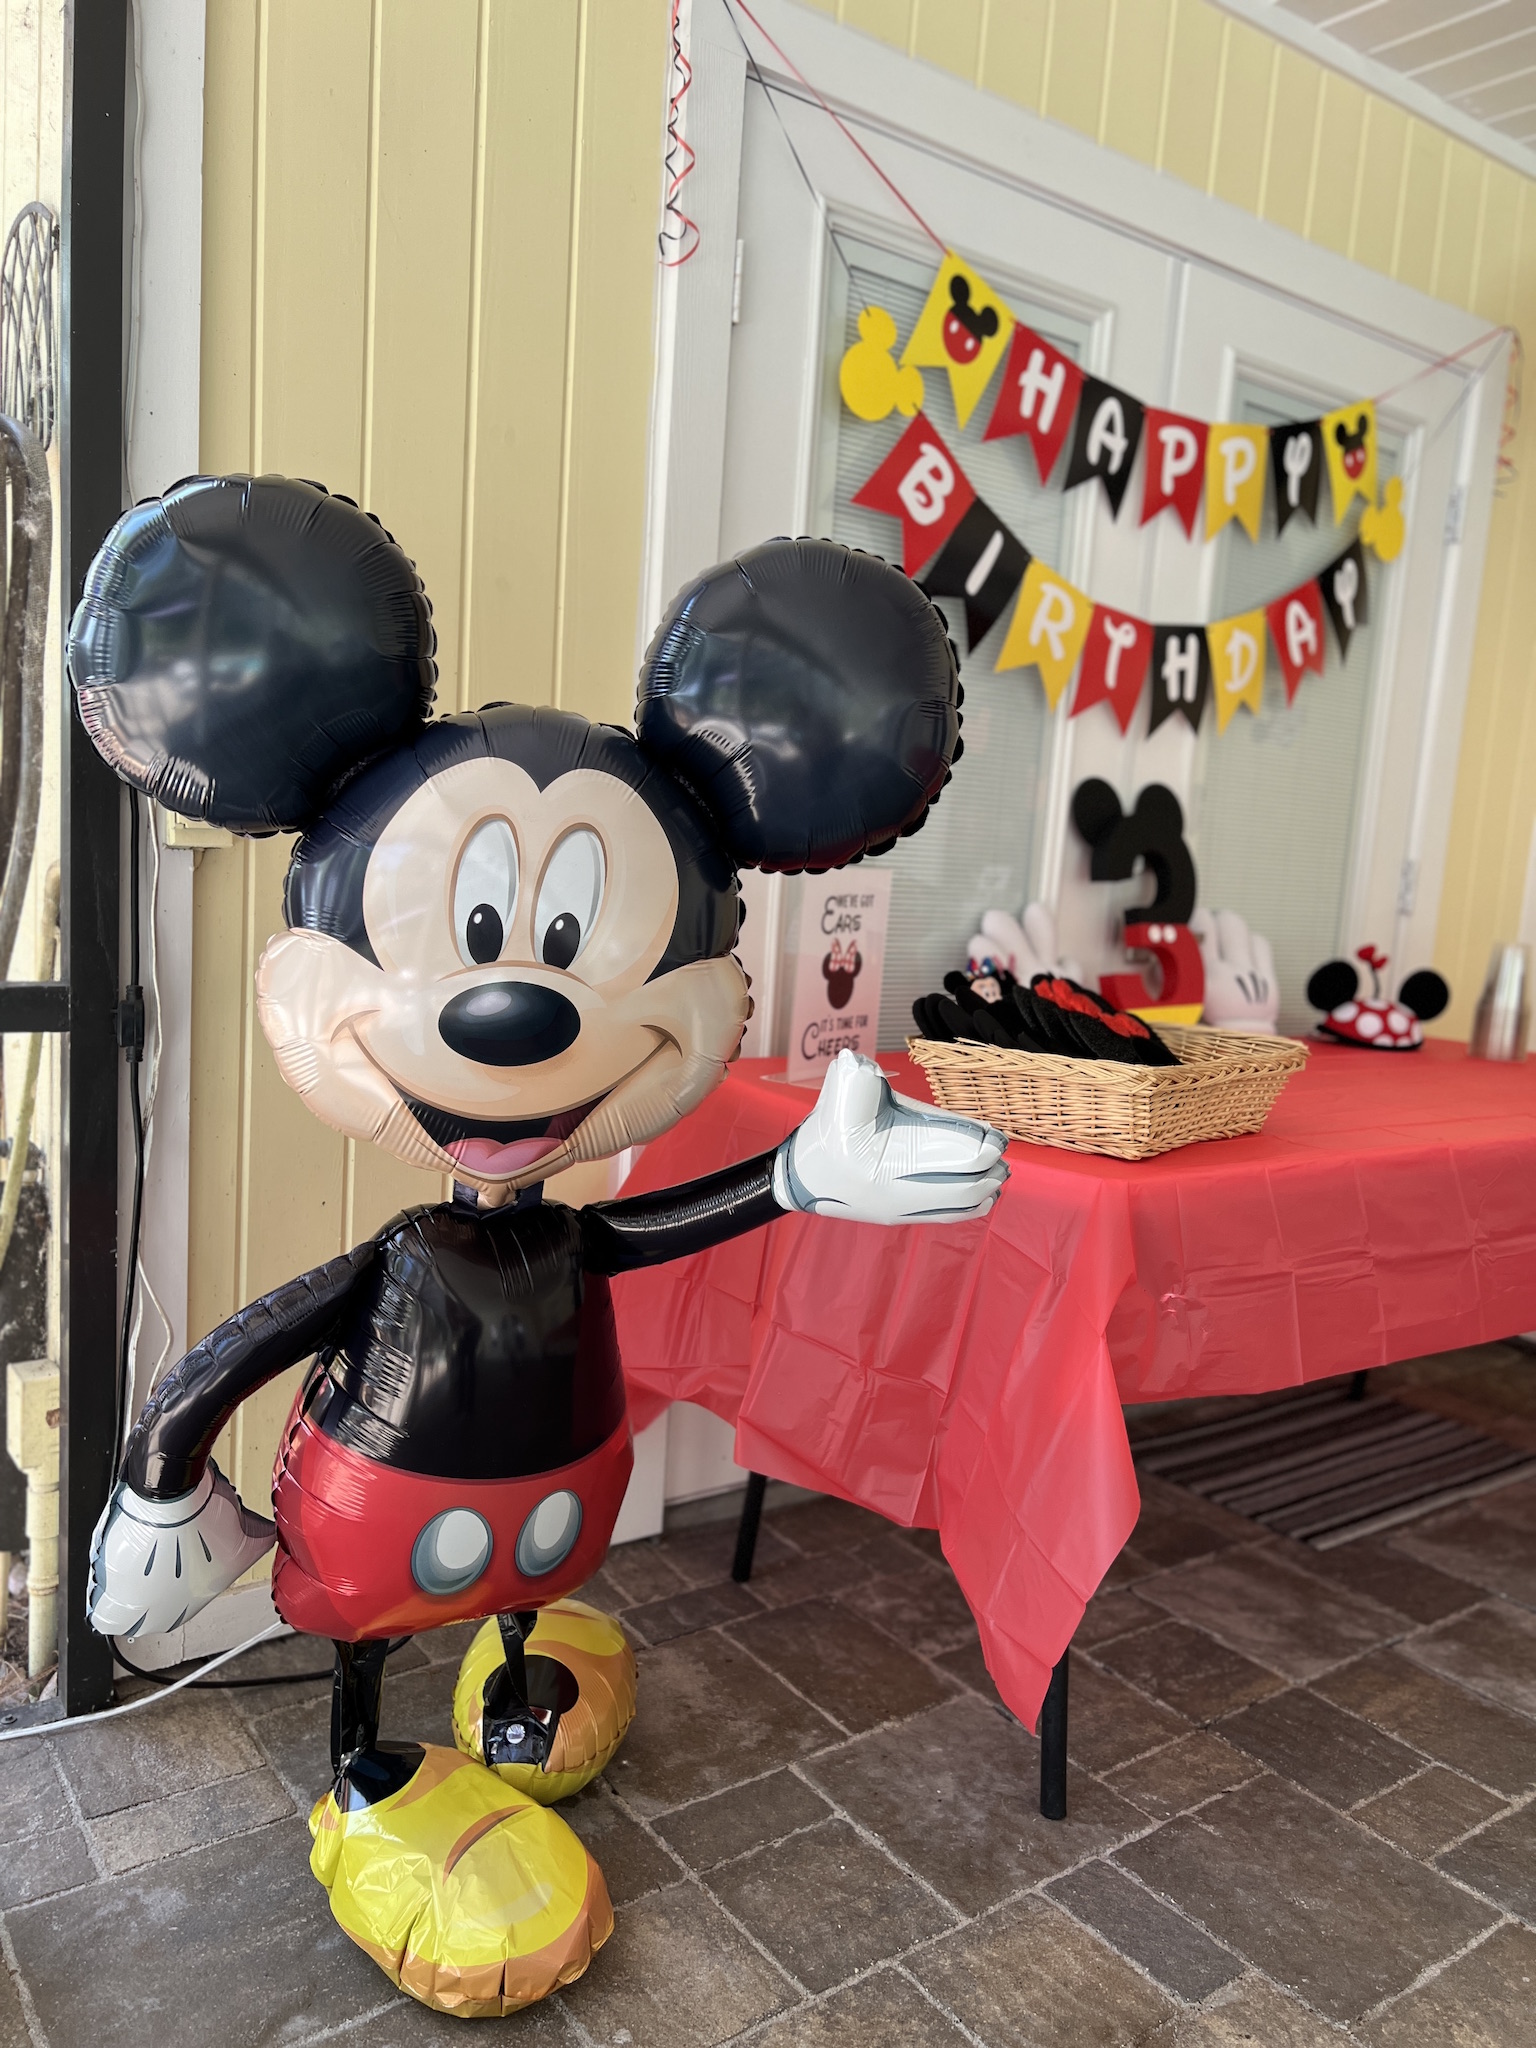 Life-size walking Mickey Mouse balloon decor at Pepper's Magical "Mickey & Minnie Mouse" 3rd Birthday Pool Party | Creative ideas for hosting a magical Mickey & Minnie themed birthday bash for your little Mouseketeer with do-able decor, punny snacks, and party games that are fun for all ages! via thinkingcloset.com